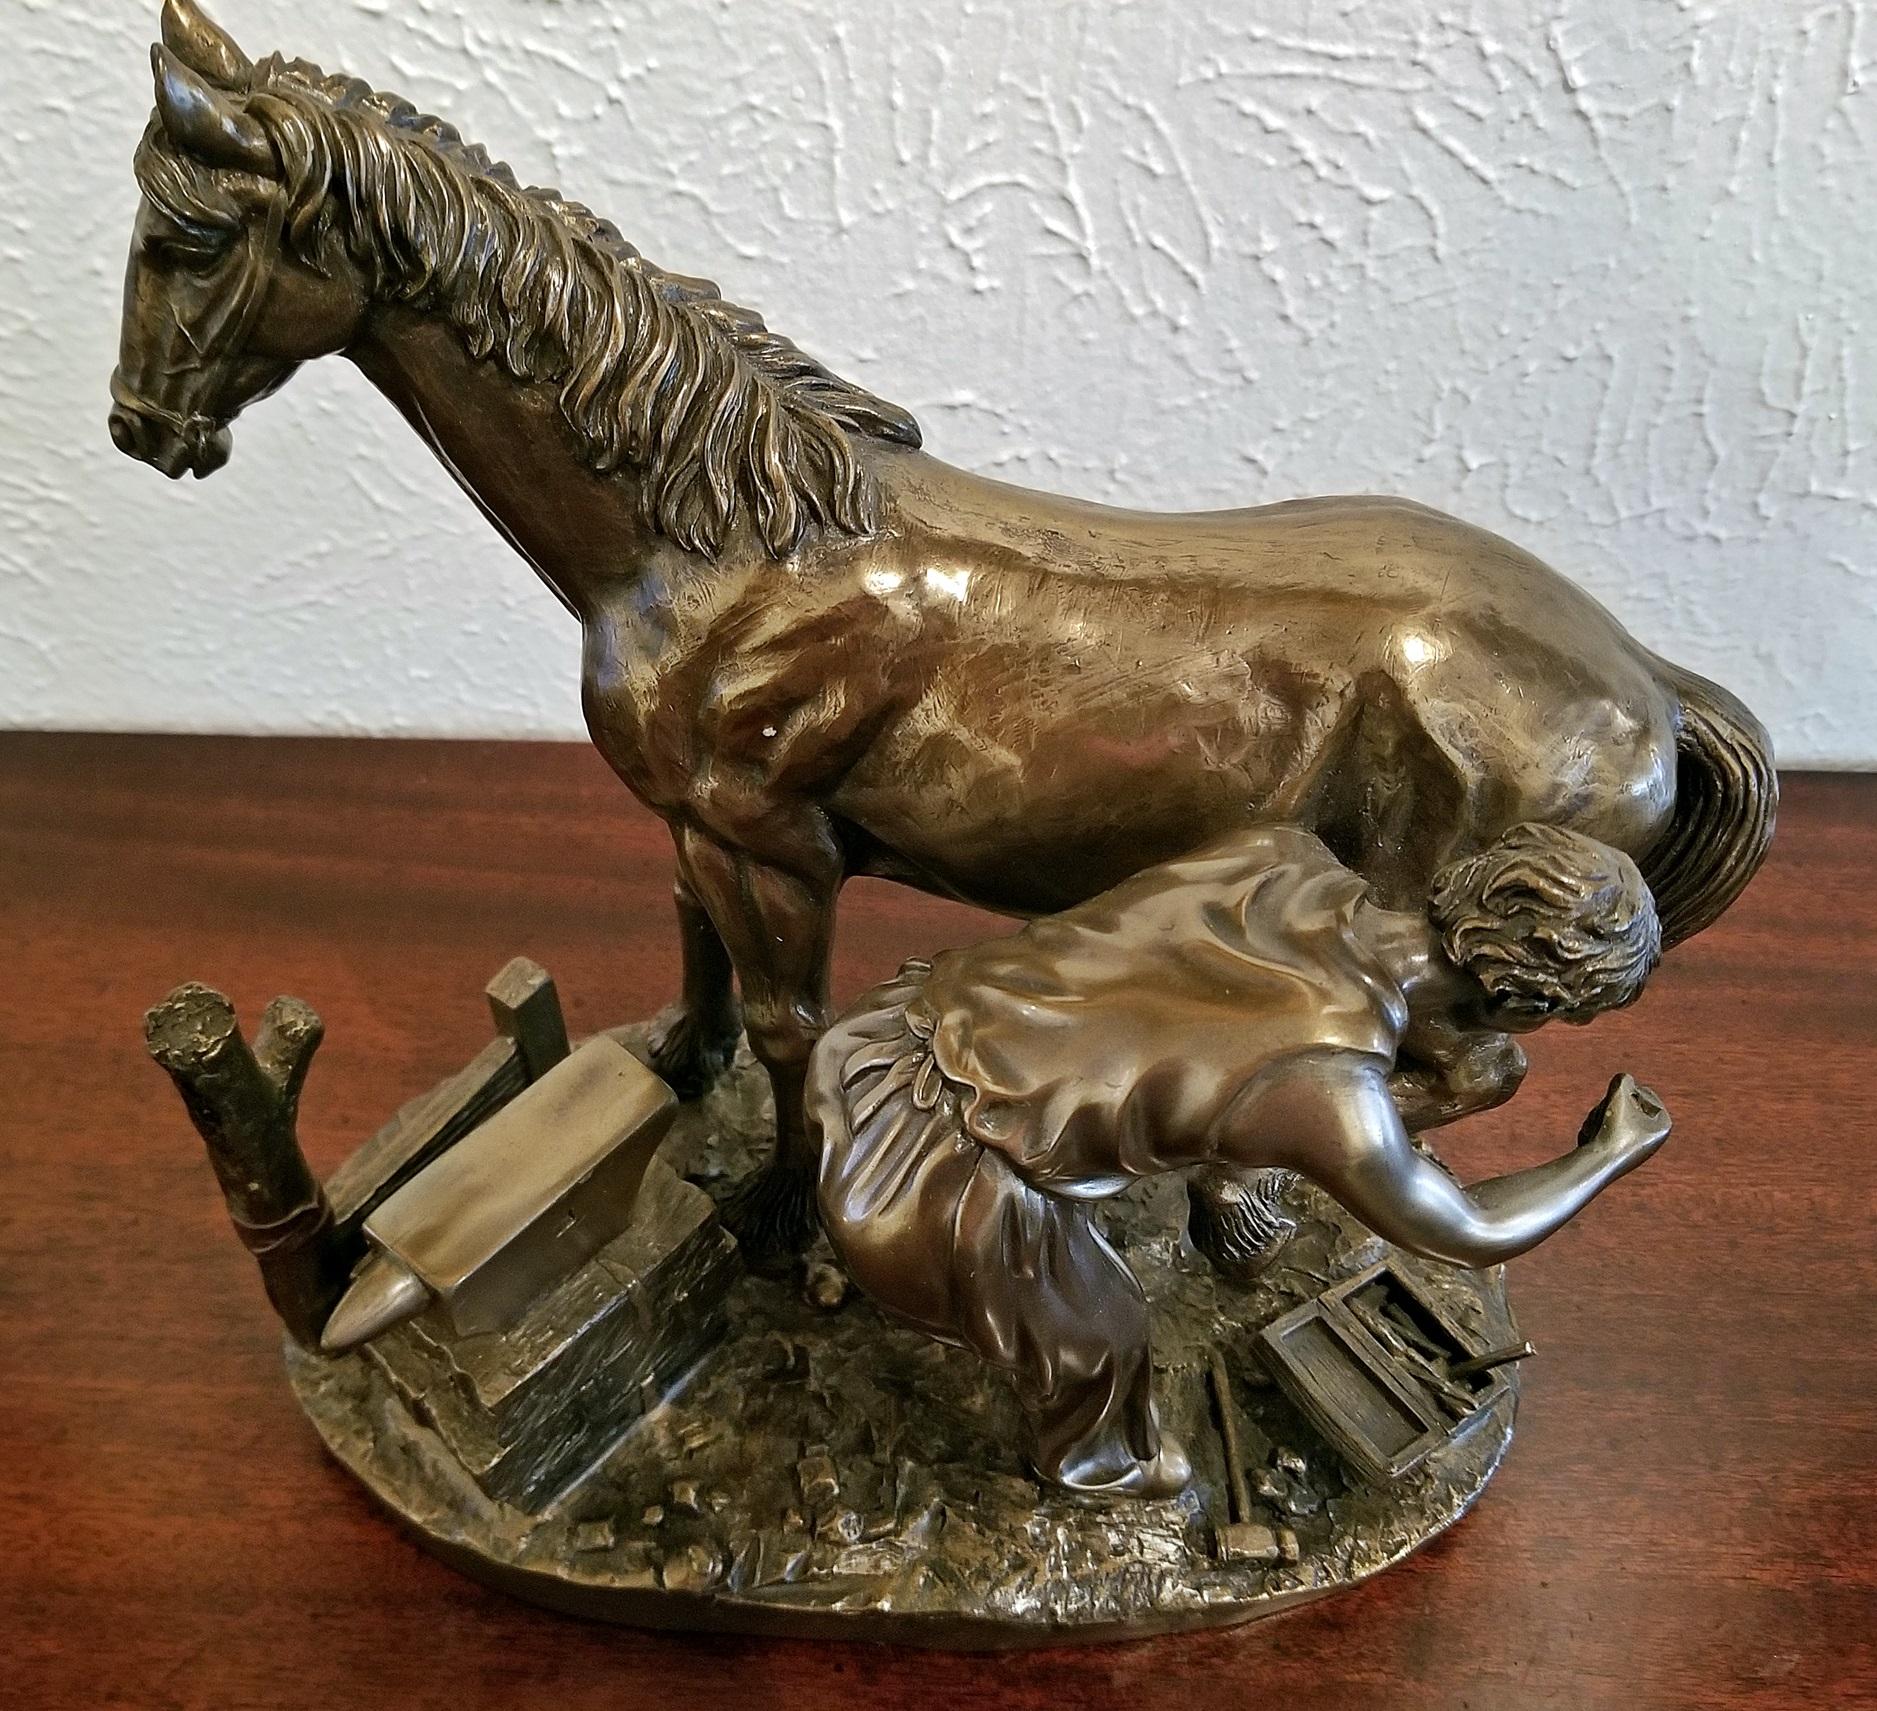 Lovely study of a horse and farrier.

Another from the Genesis collection by Mullingar Pewter.

Bronze style sculpture…………..plaster/resin cast model that is bronzed after setting.

The farrier is changing the horse’s shoes with anvil in